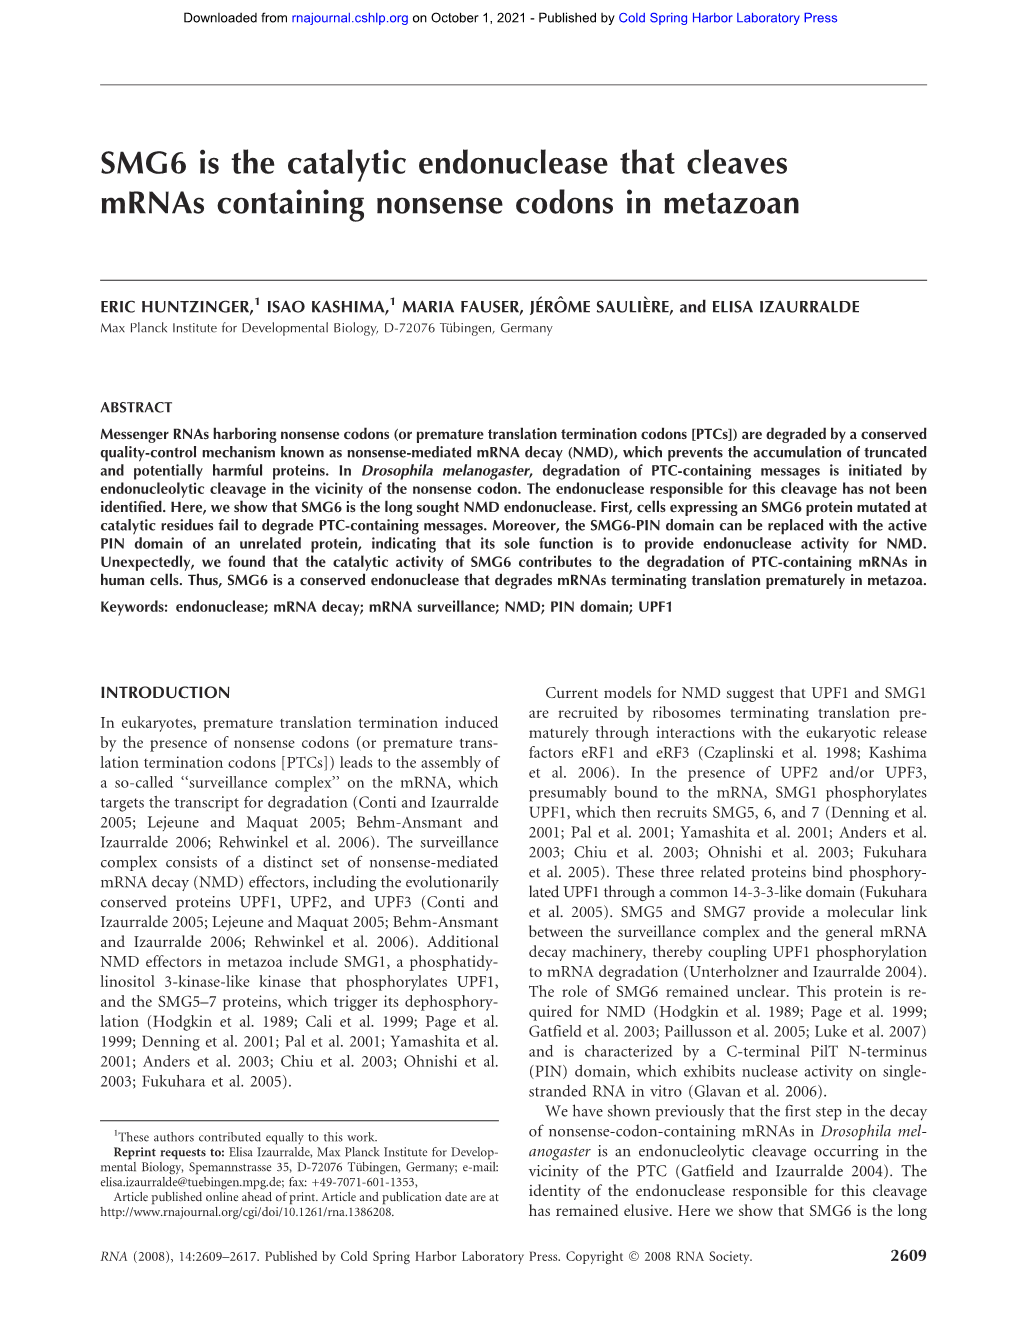 SMG6 Is the Catalytic Endonuclease That Cleaves Mrnas Containing Nonsense Codons in Metazoan